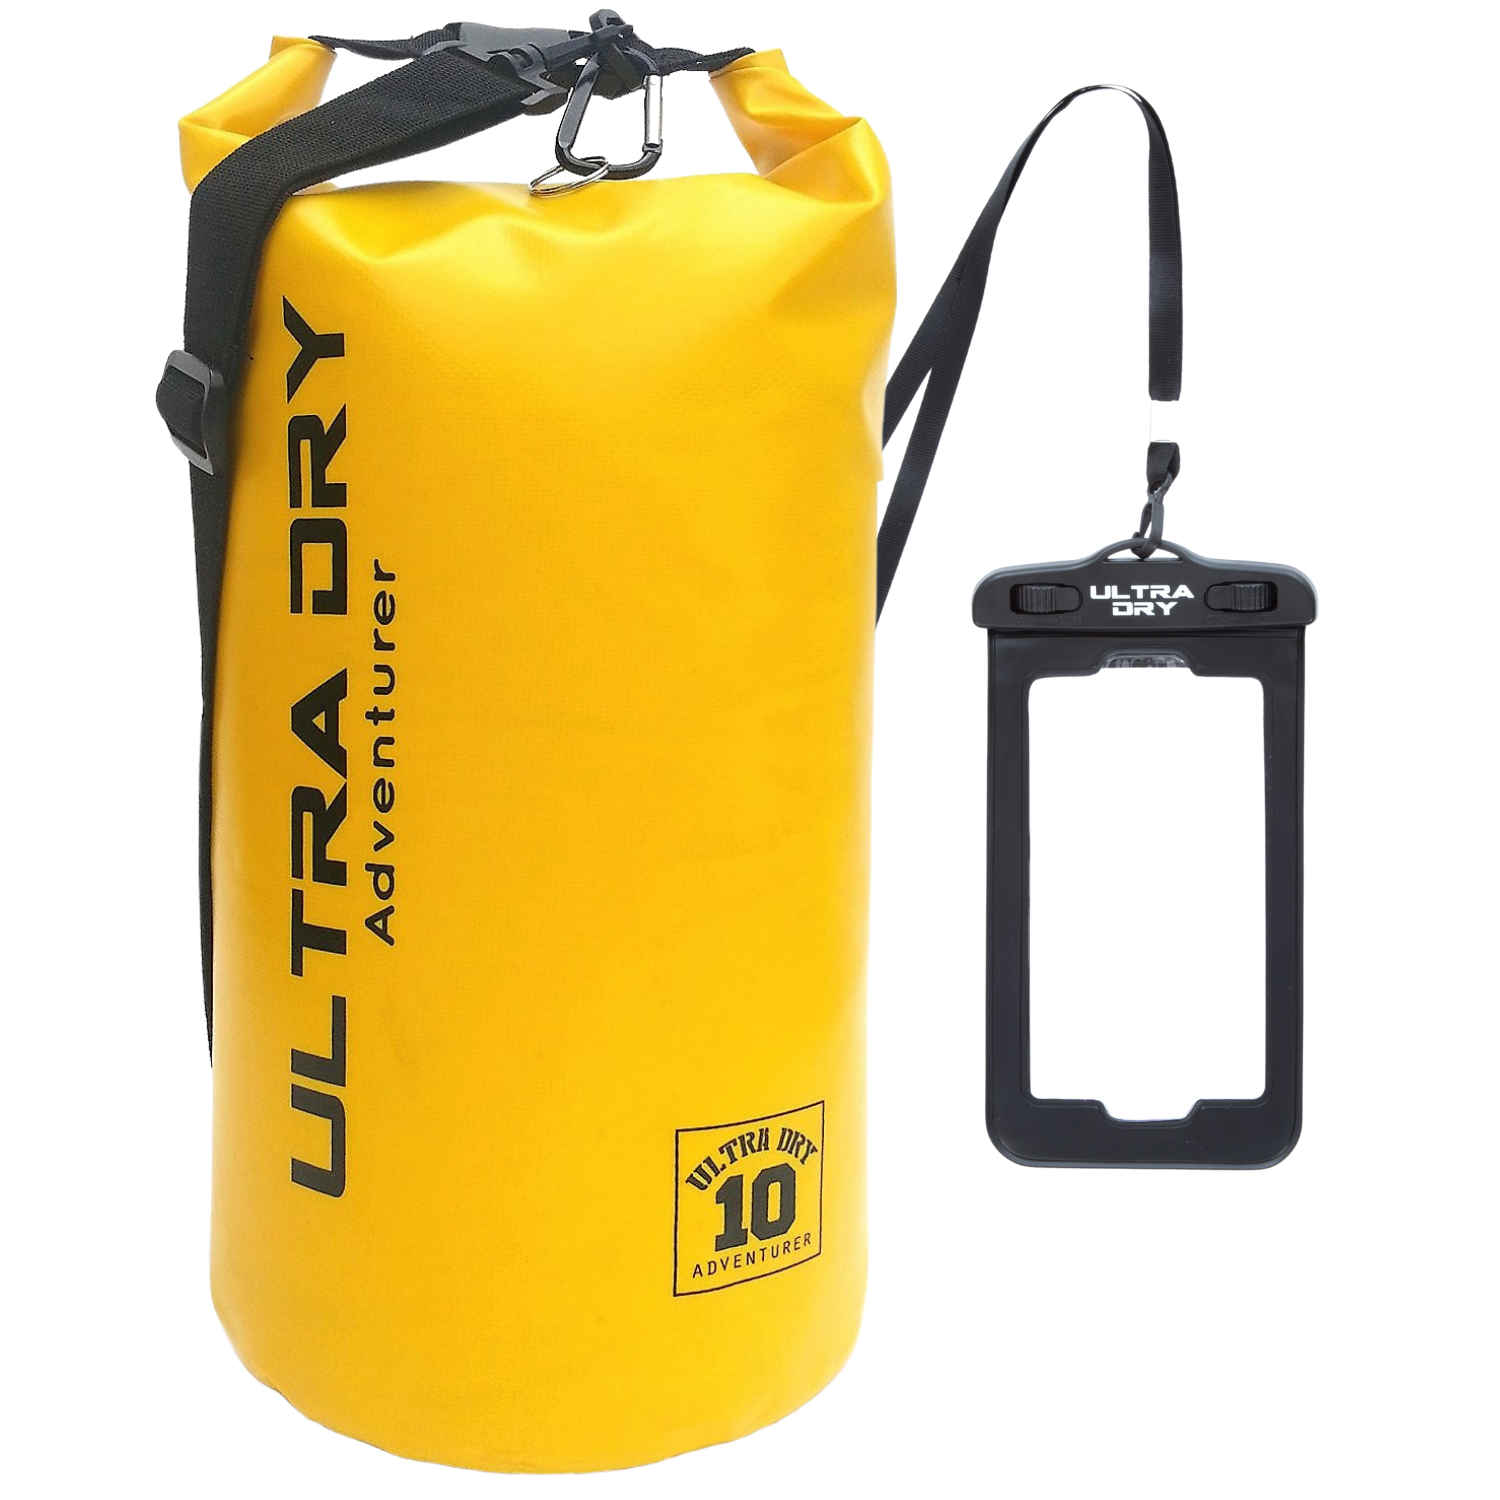 https://www.ultradrybags.co.uk/wp-content/uploads/2016/10/10-litre-dry-bag-with-strap.png